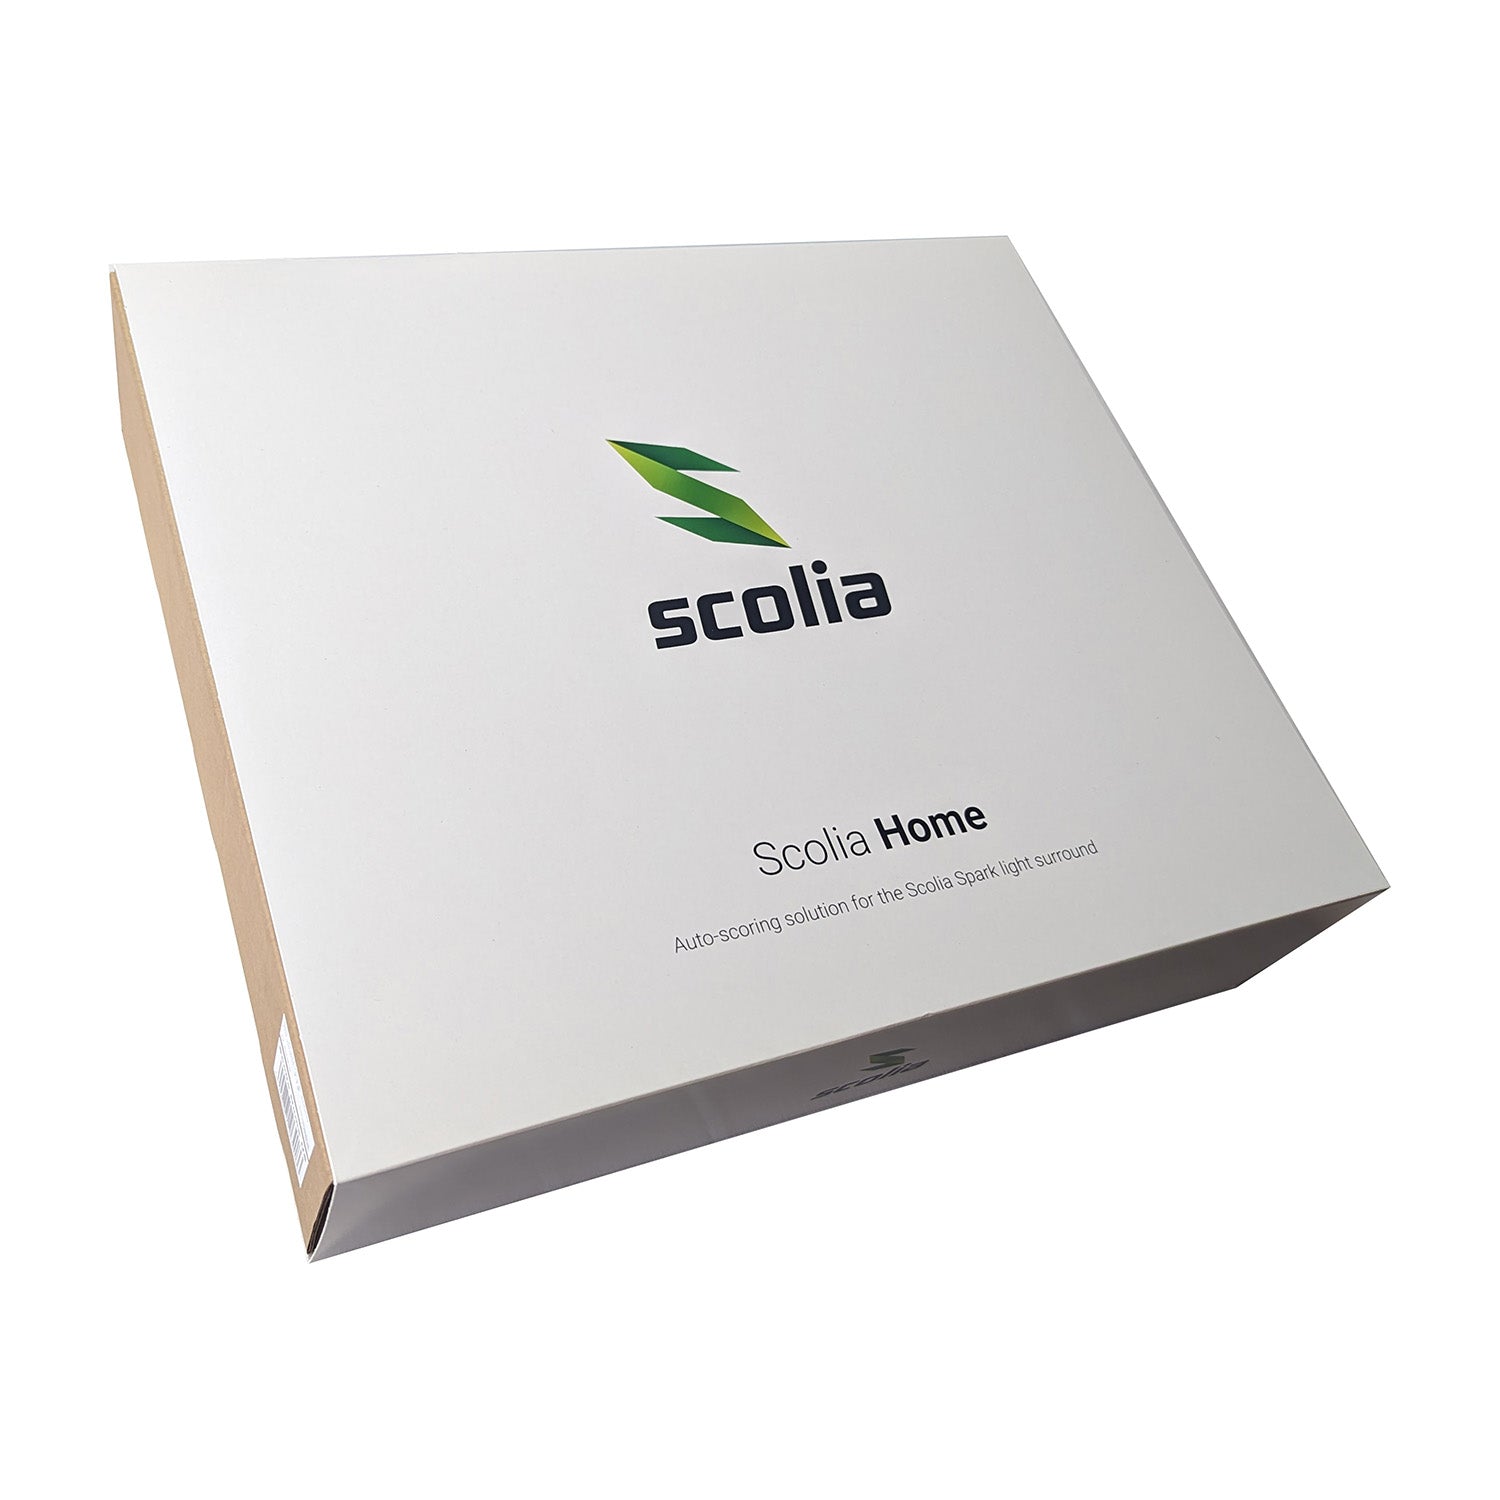 Scolia Home Electronic Score System 